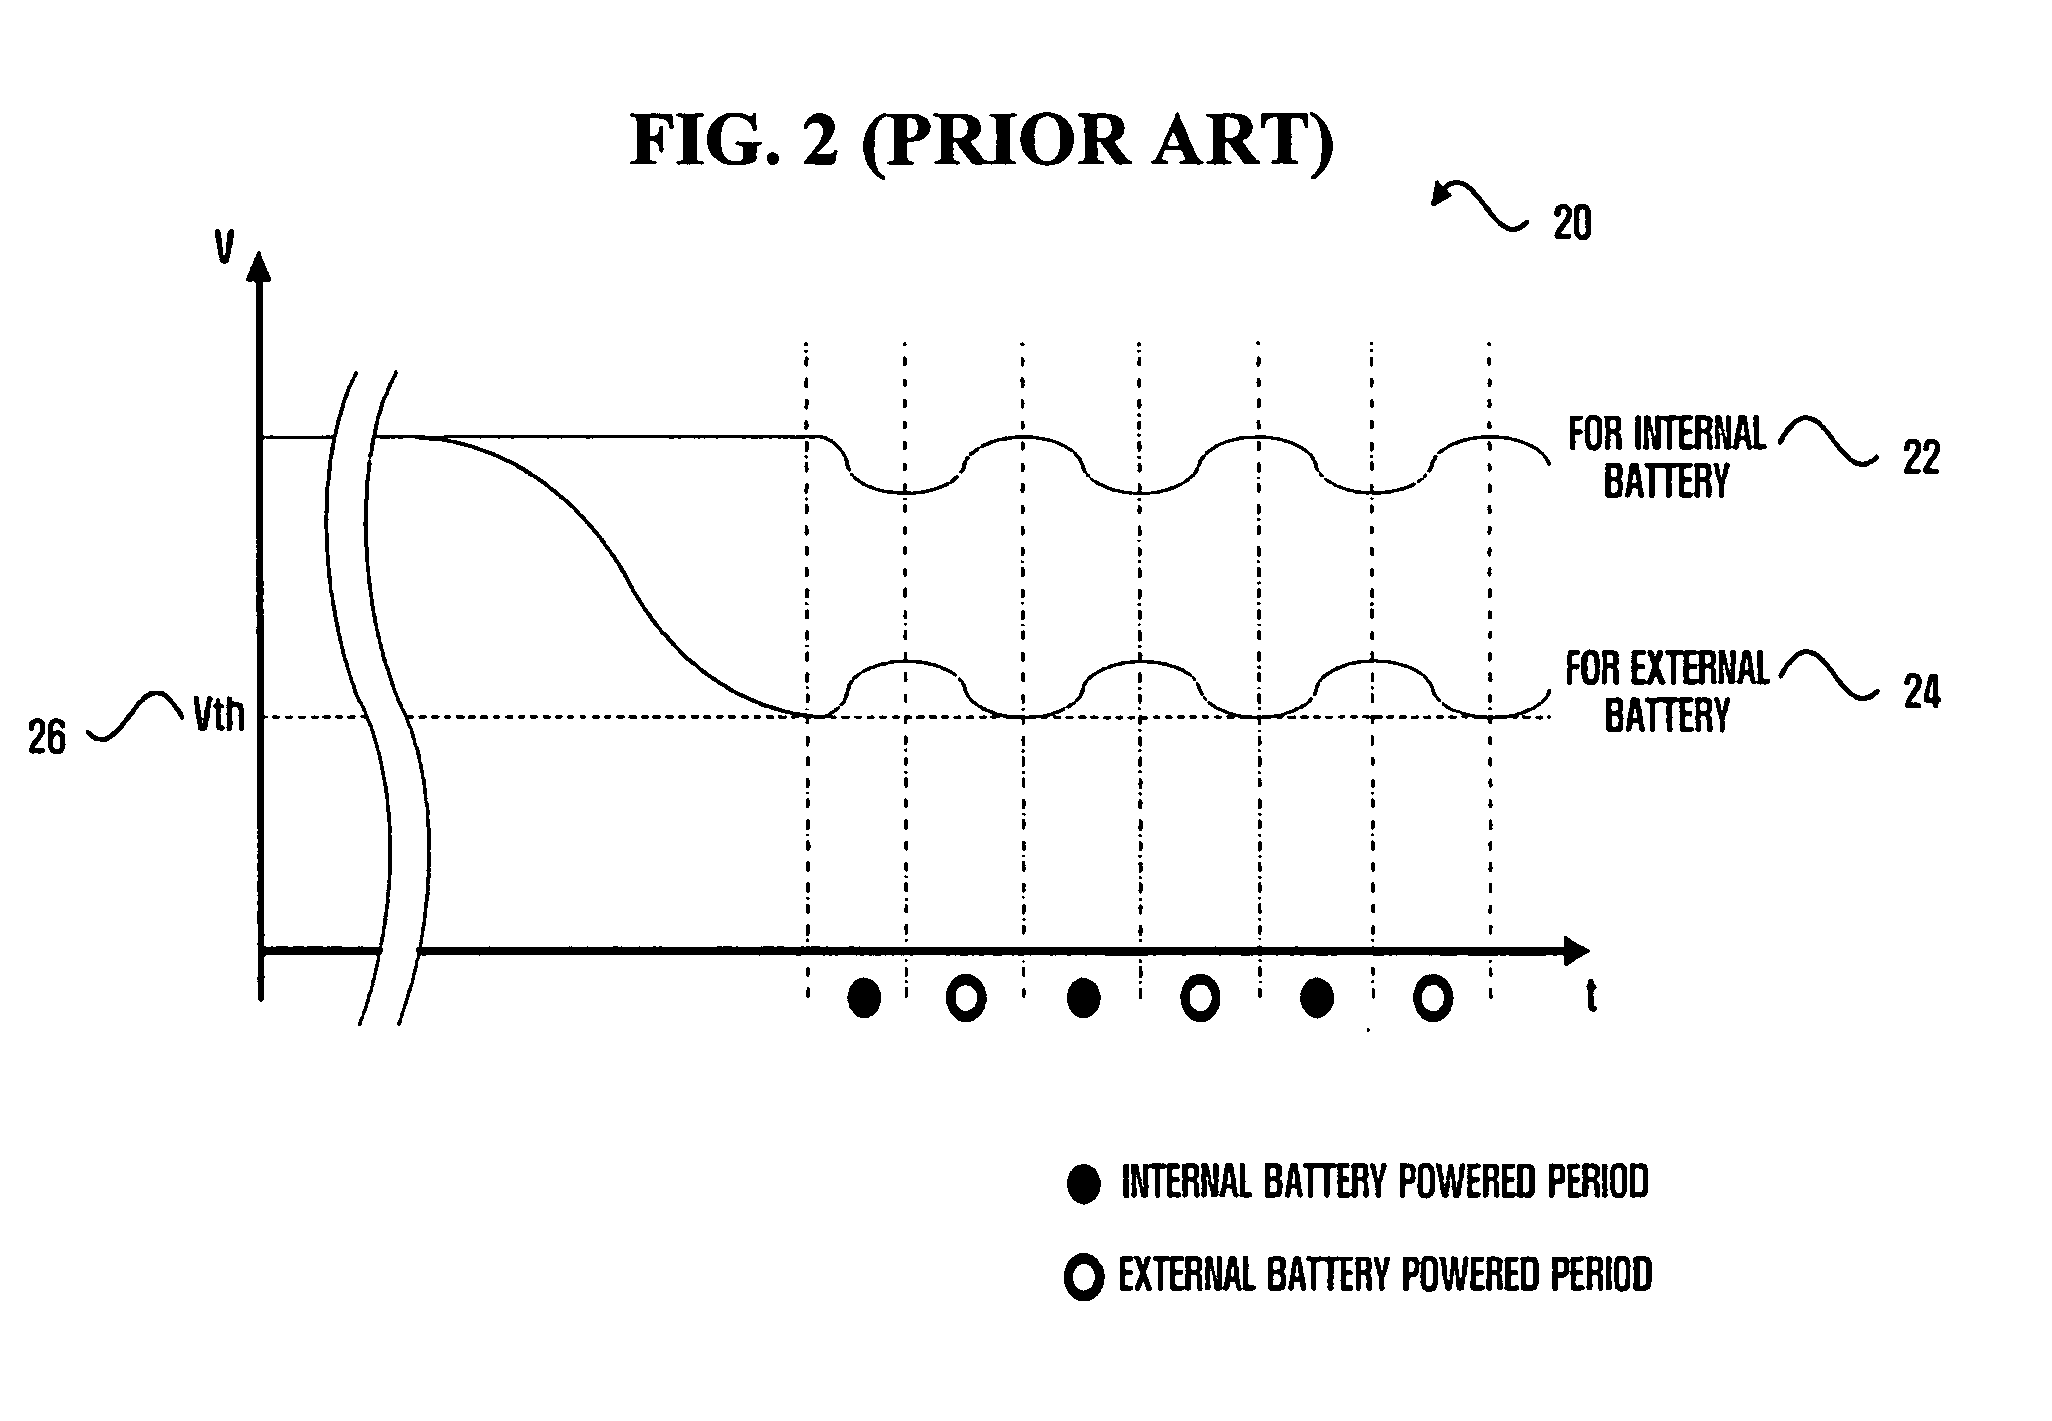 Apparatus and method for controlling battery discharge between internal battery and external battery